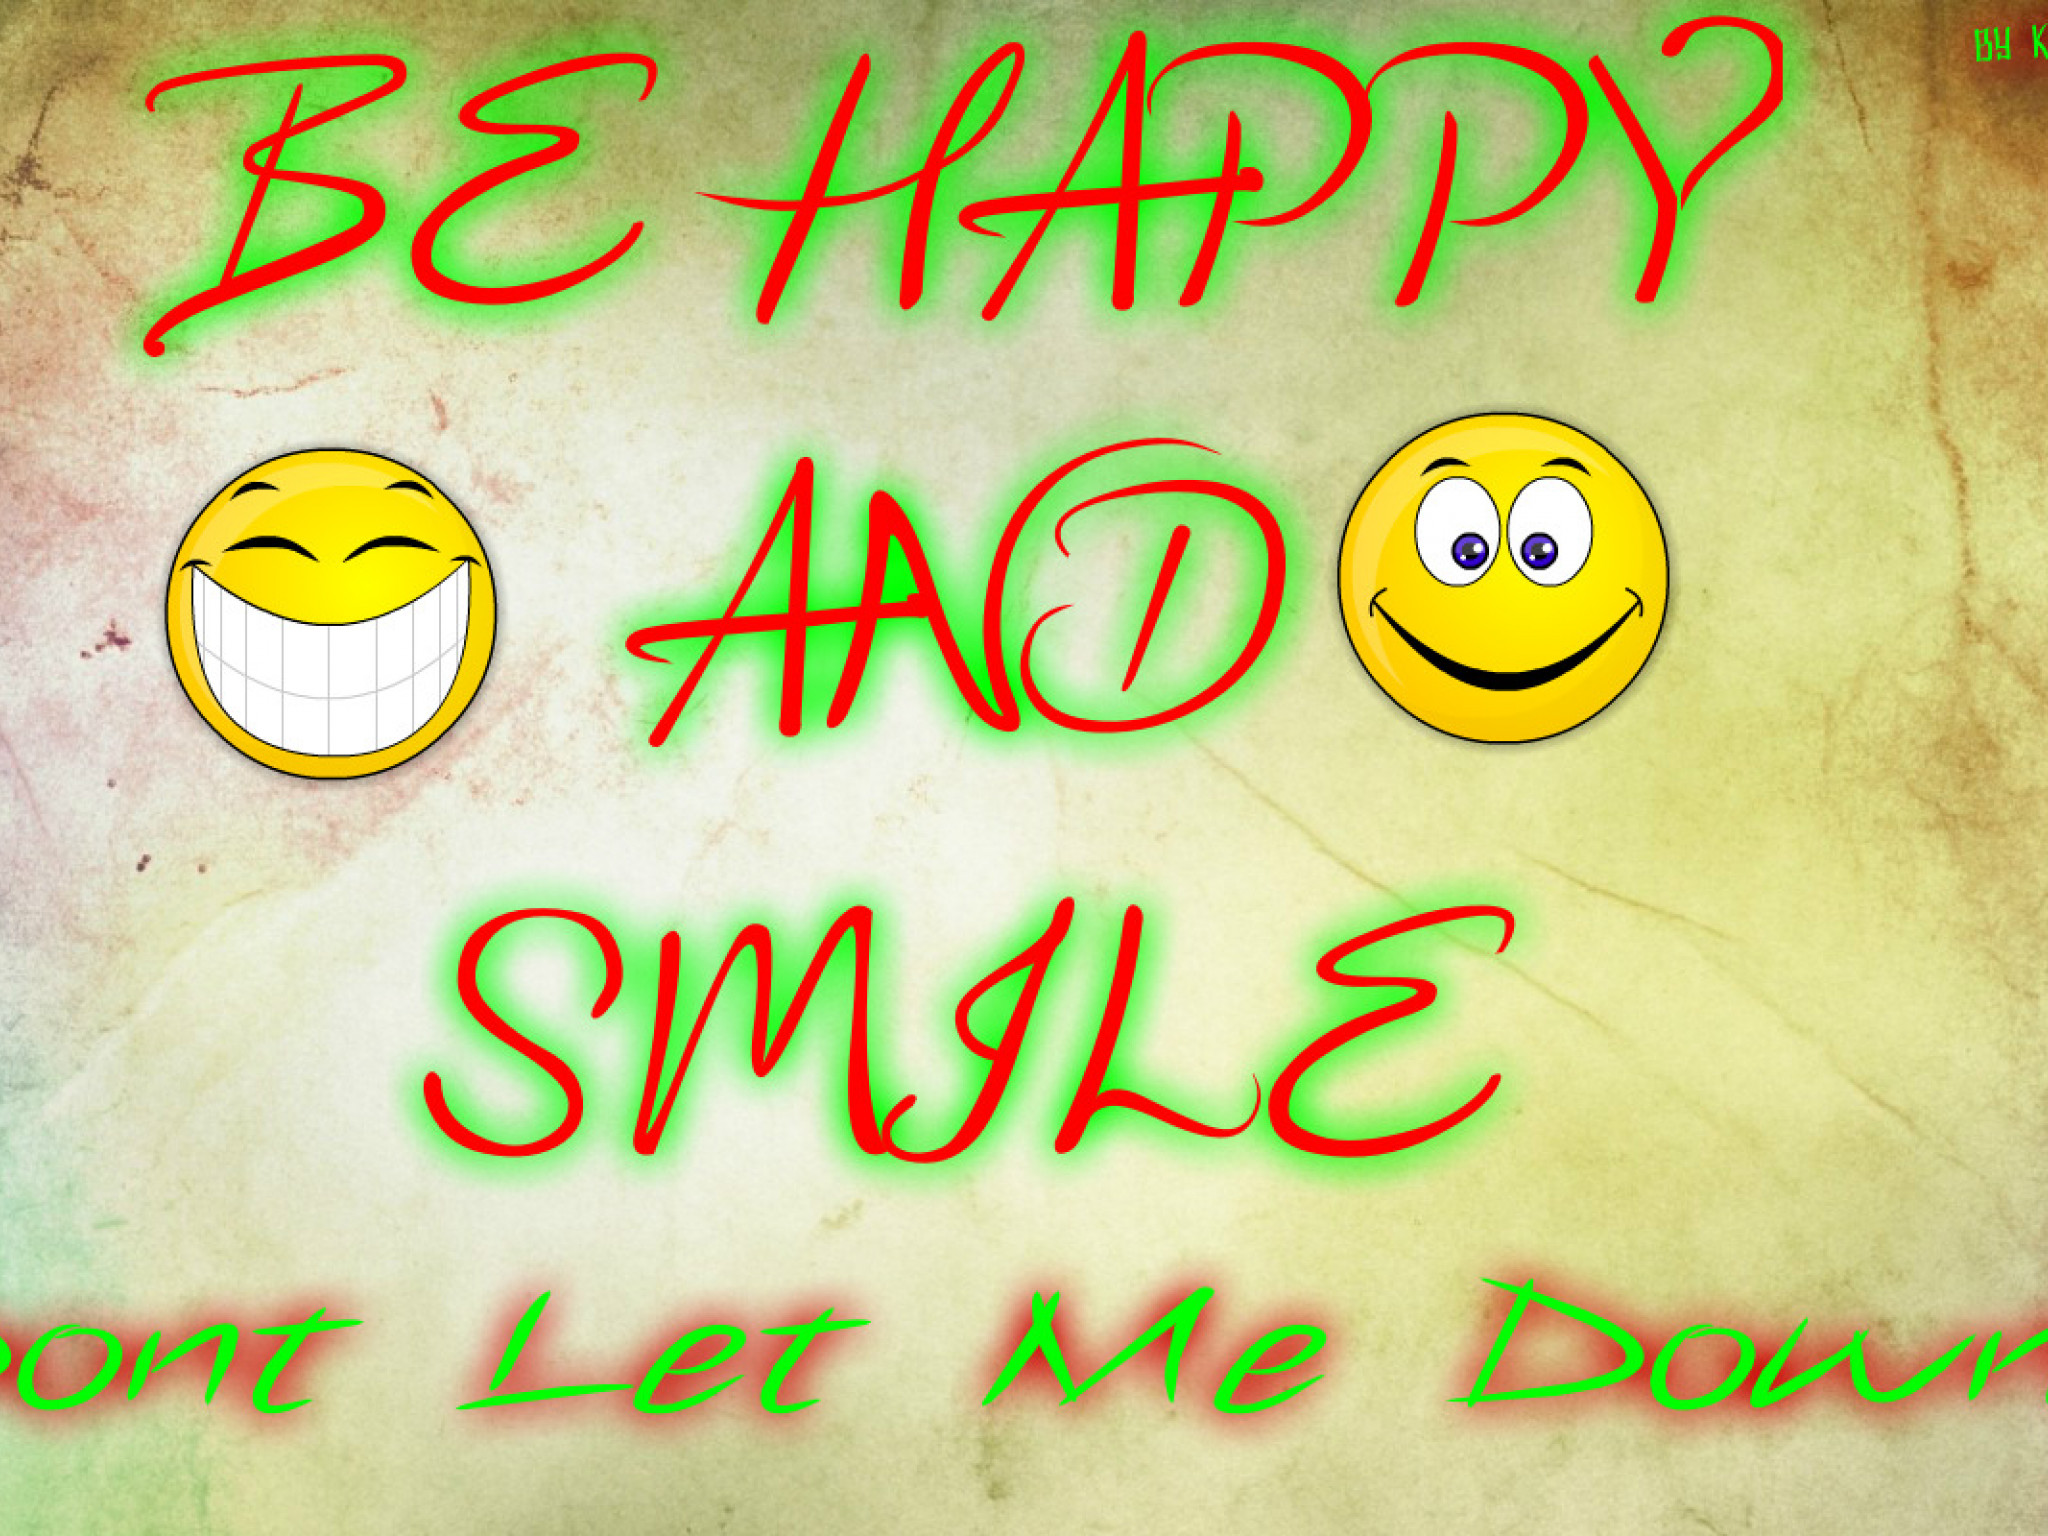 BE HAPPY AND SMILE DONT LET ME DOWN!